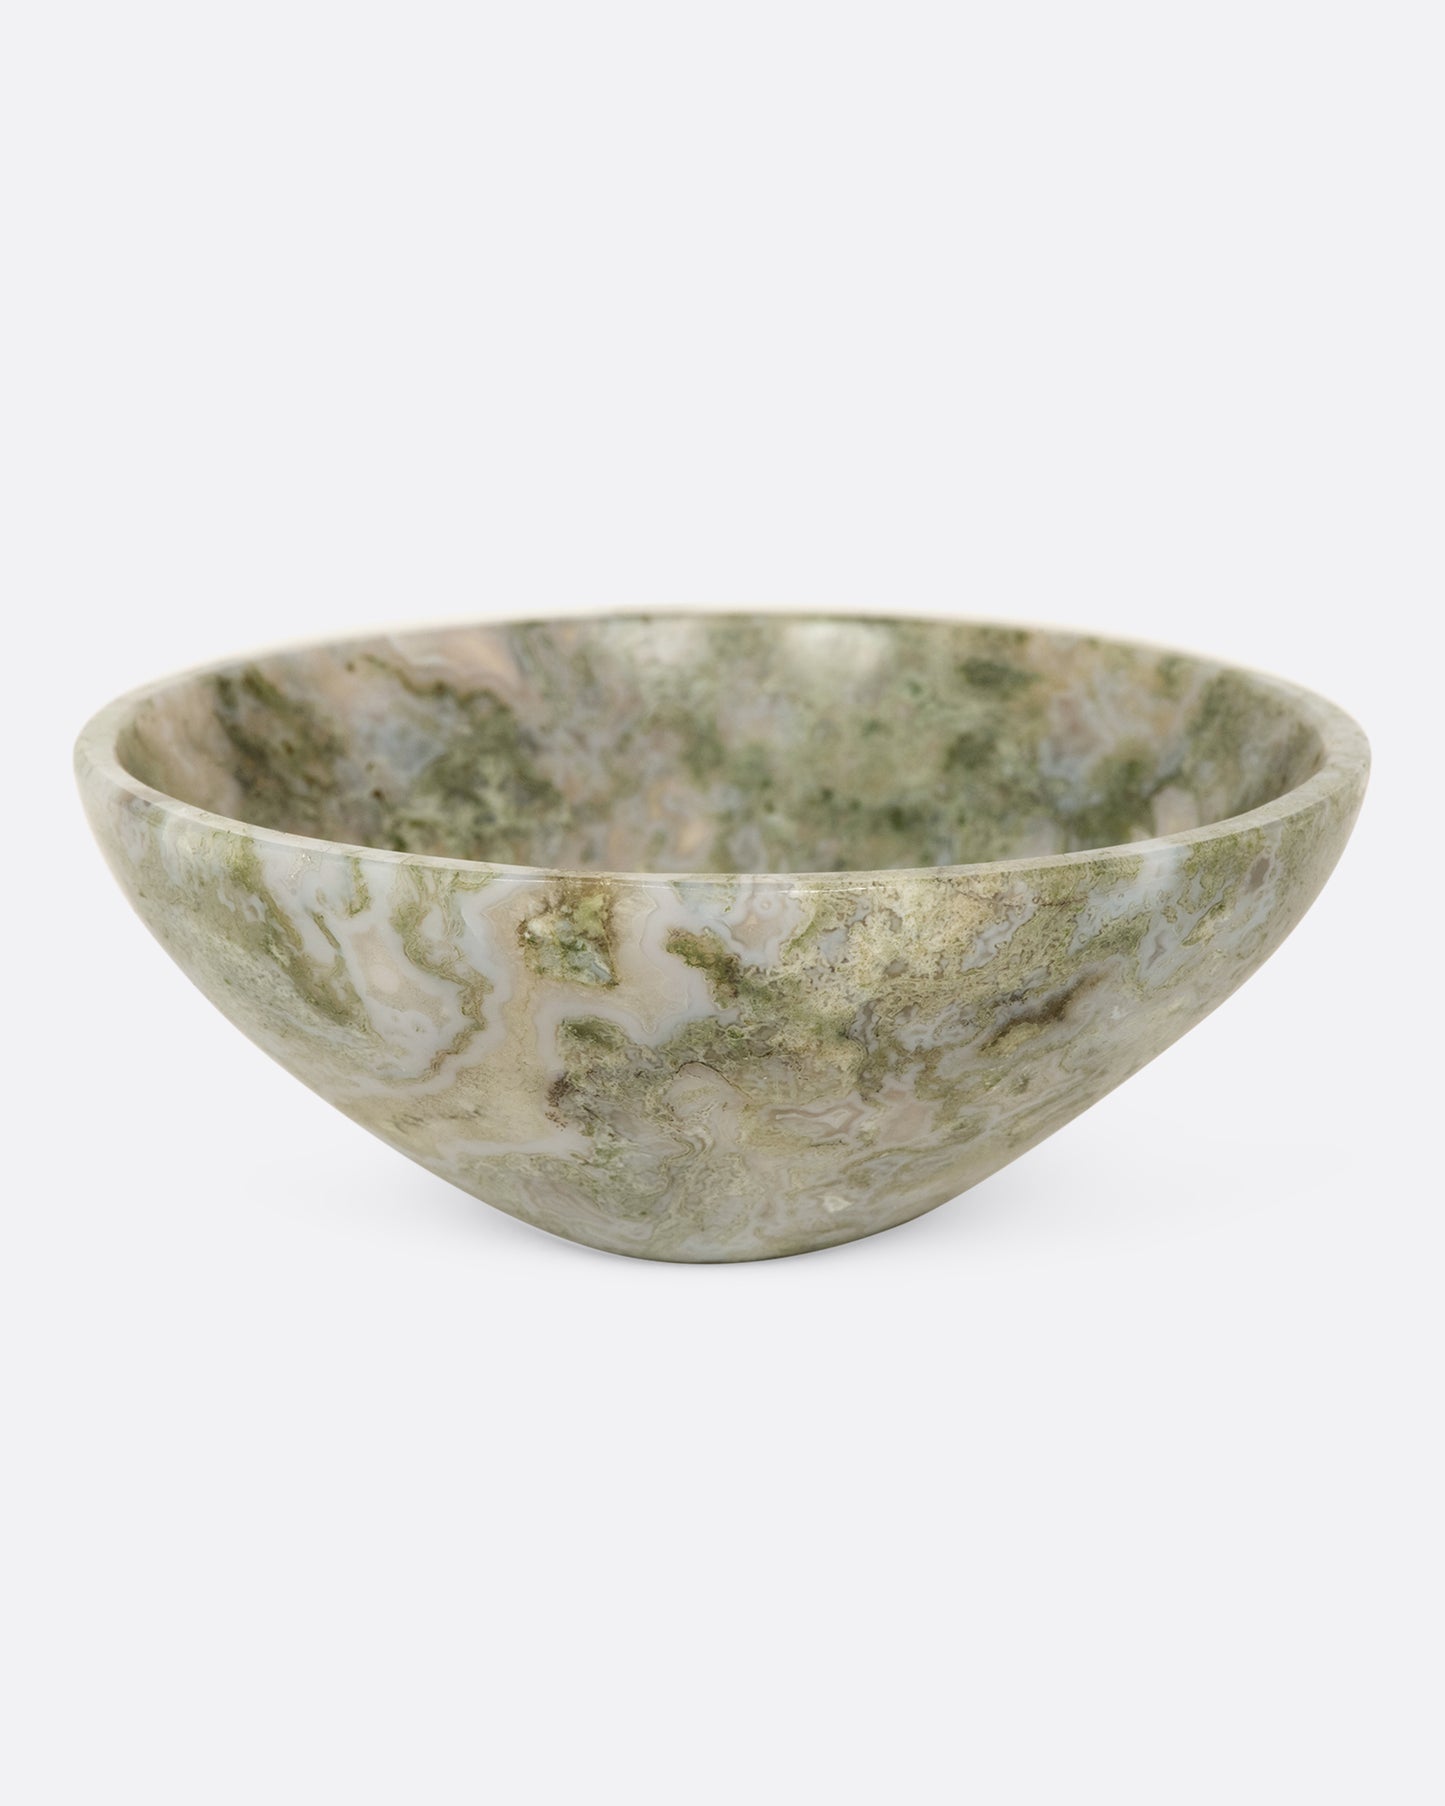 A little bowl with swirled shades of green and blue.